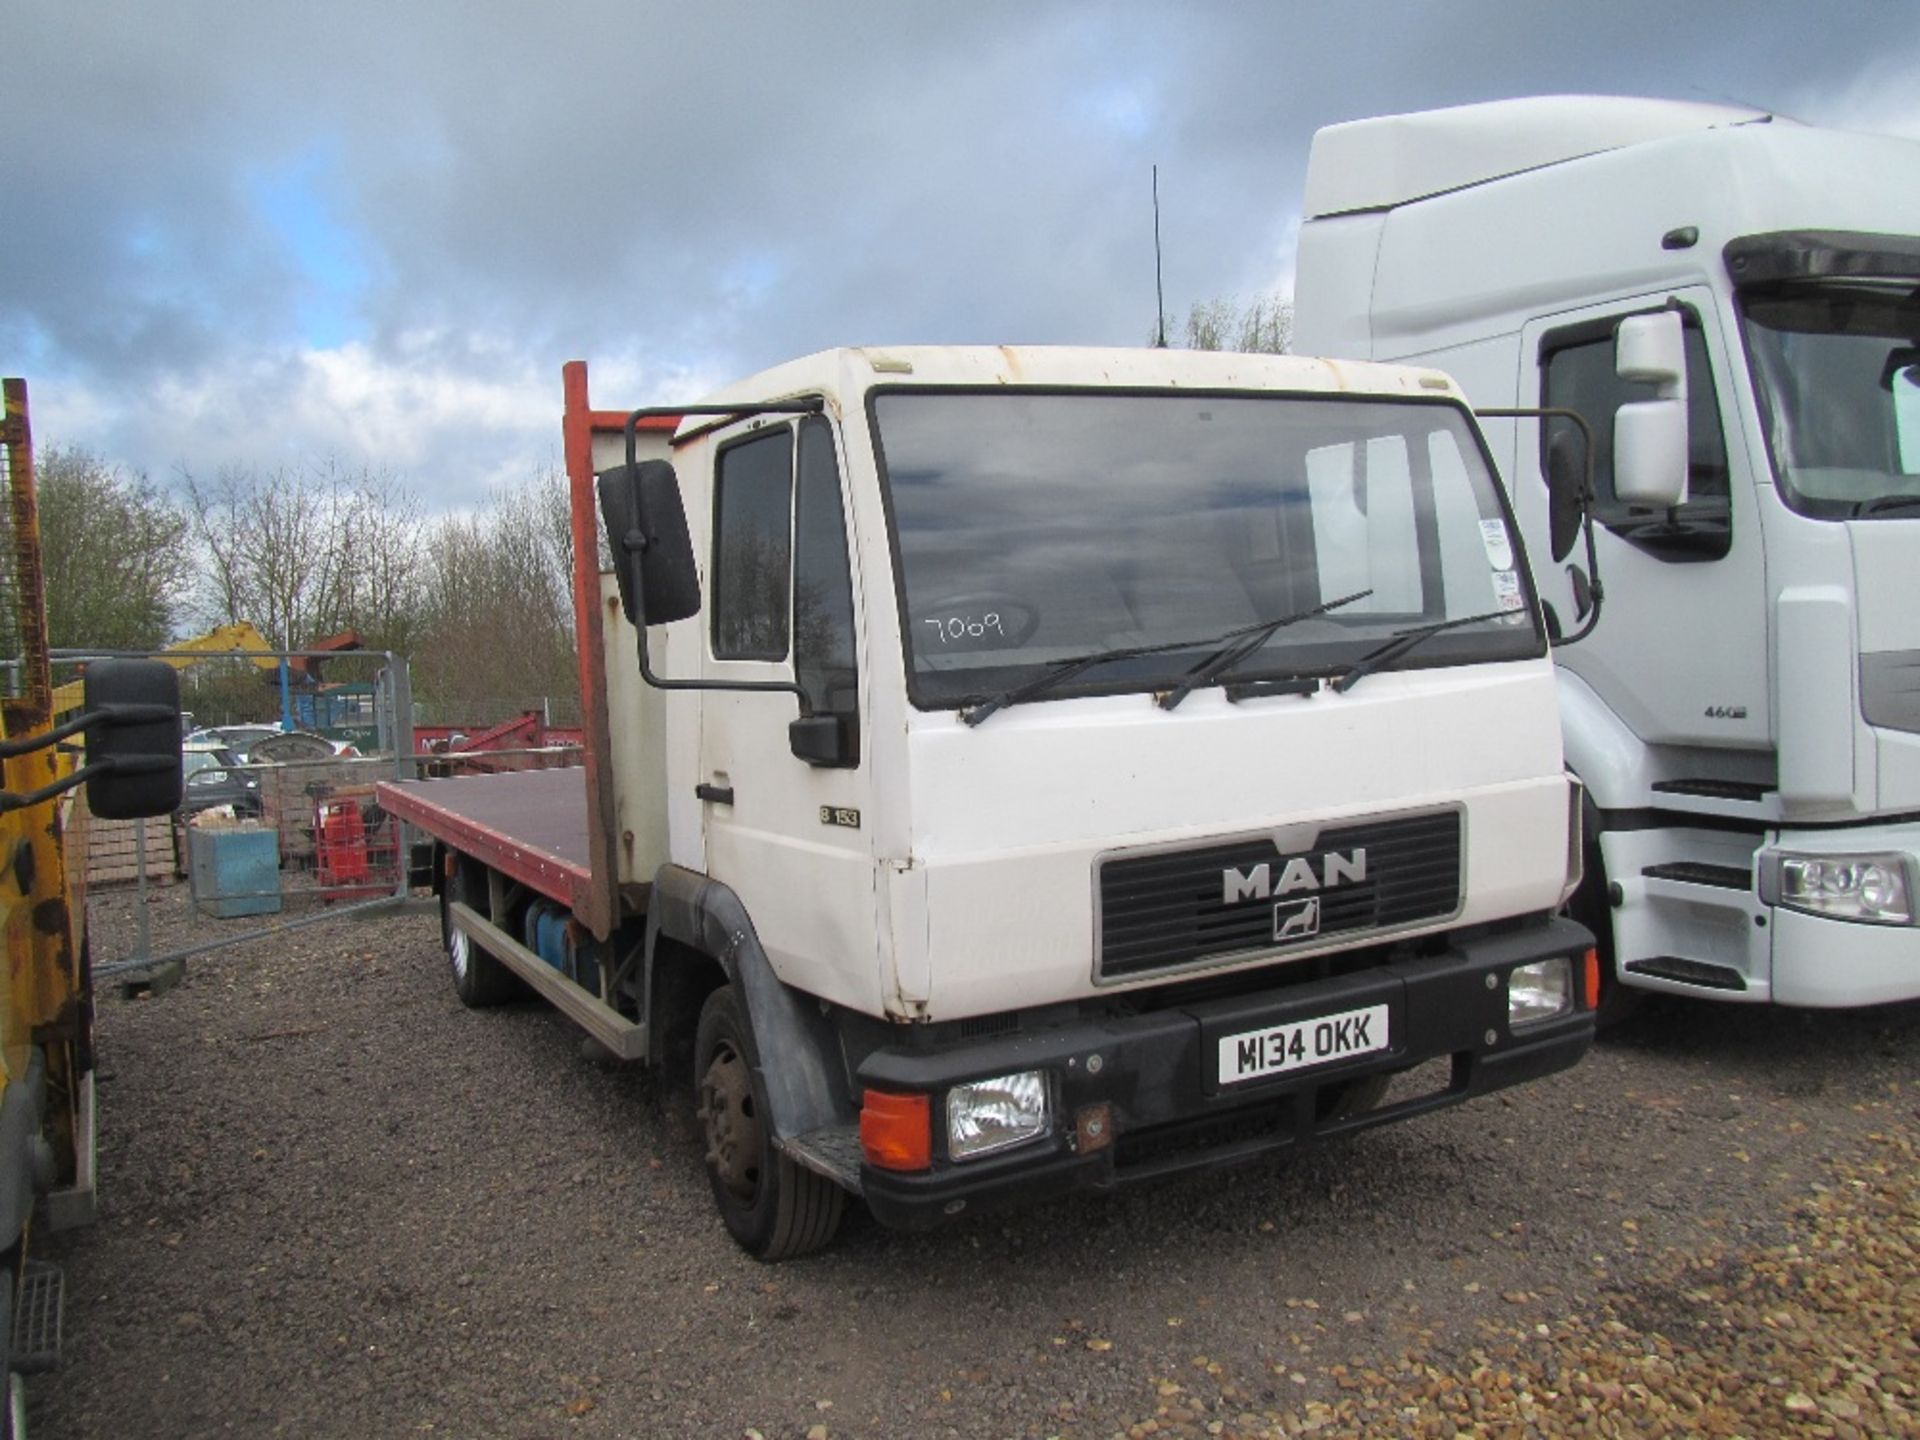 1994 Man 7.5 Ton Flat bed c/w New Floor Fitted. Reg Docs will be supplied. Reg. No. M134 OKK - Image 3 of 7